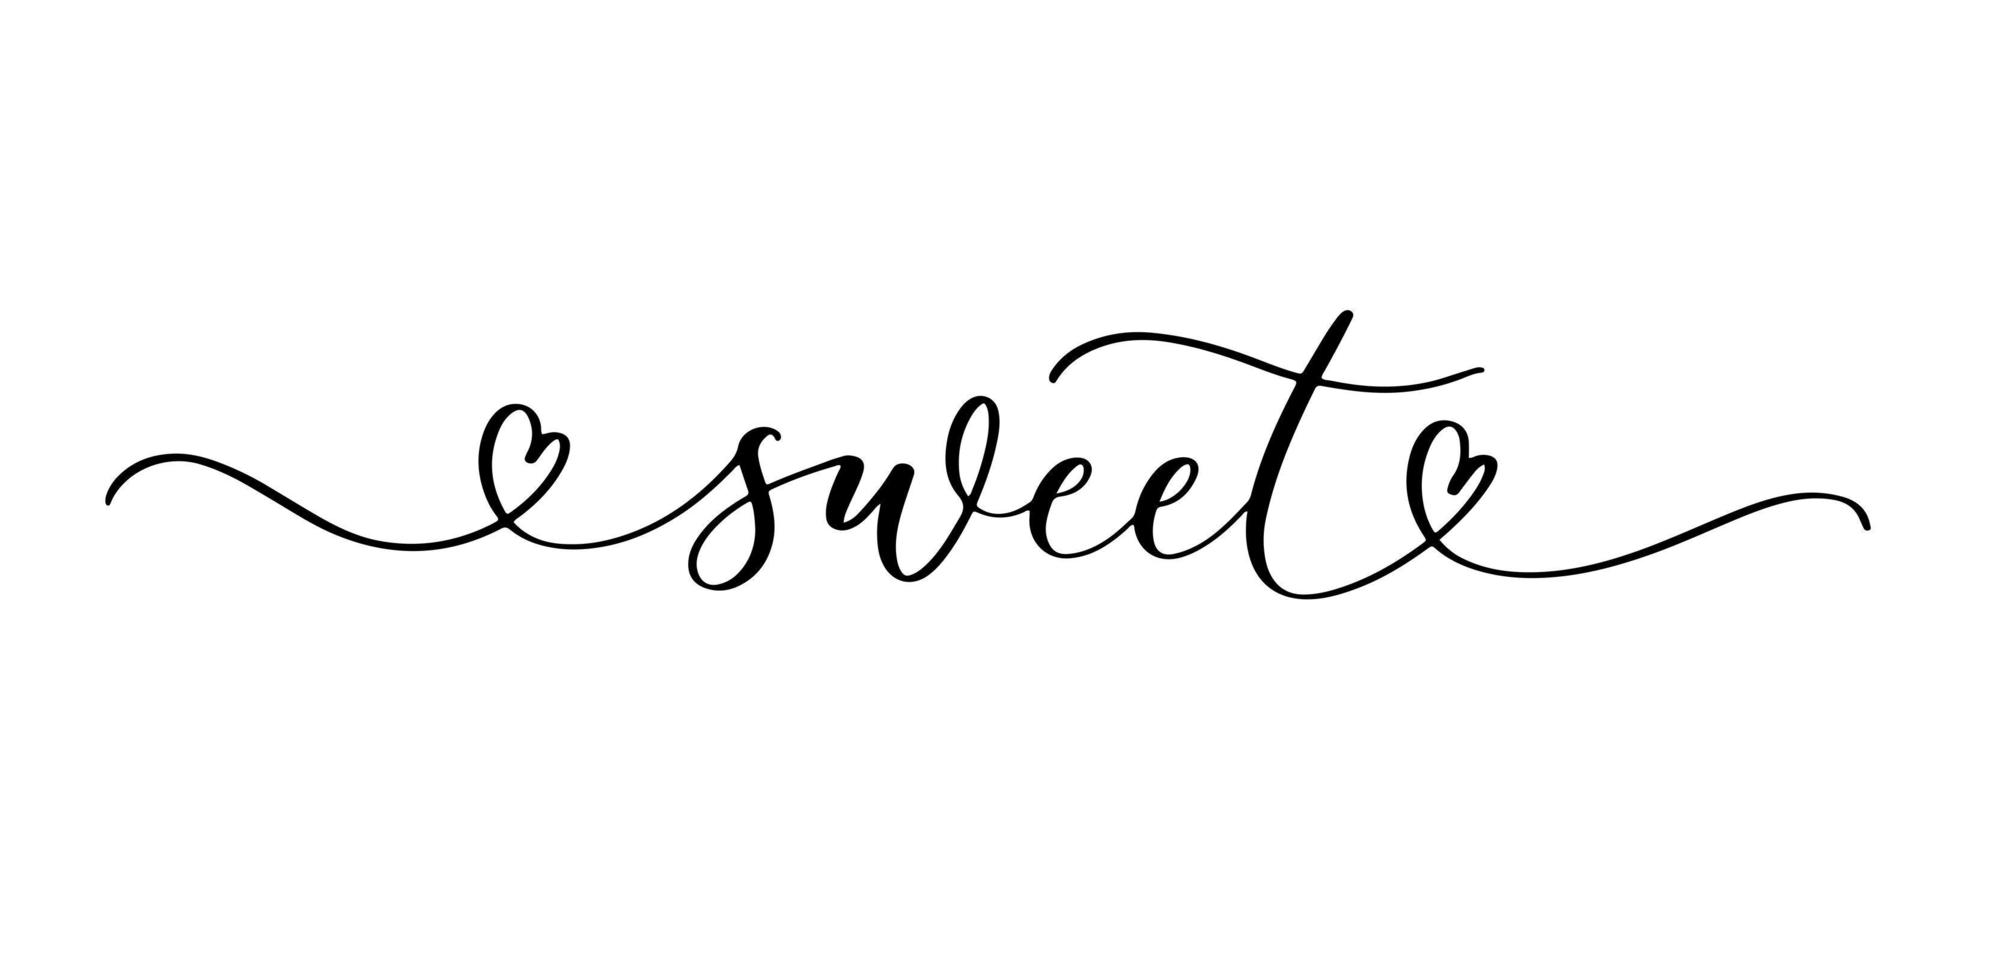 Sweet. lettering text in line vector with hearts.